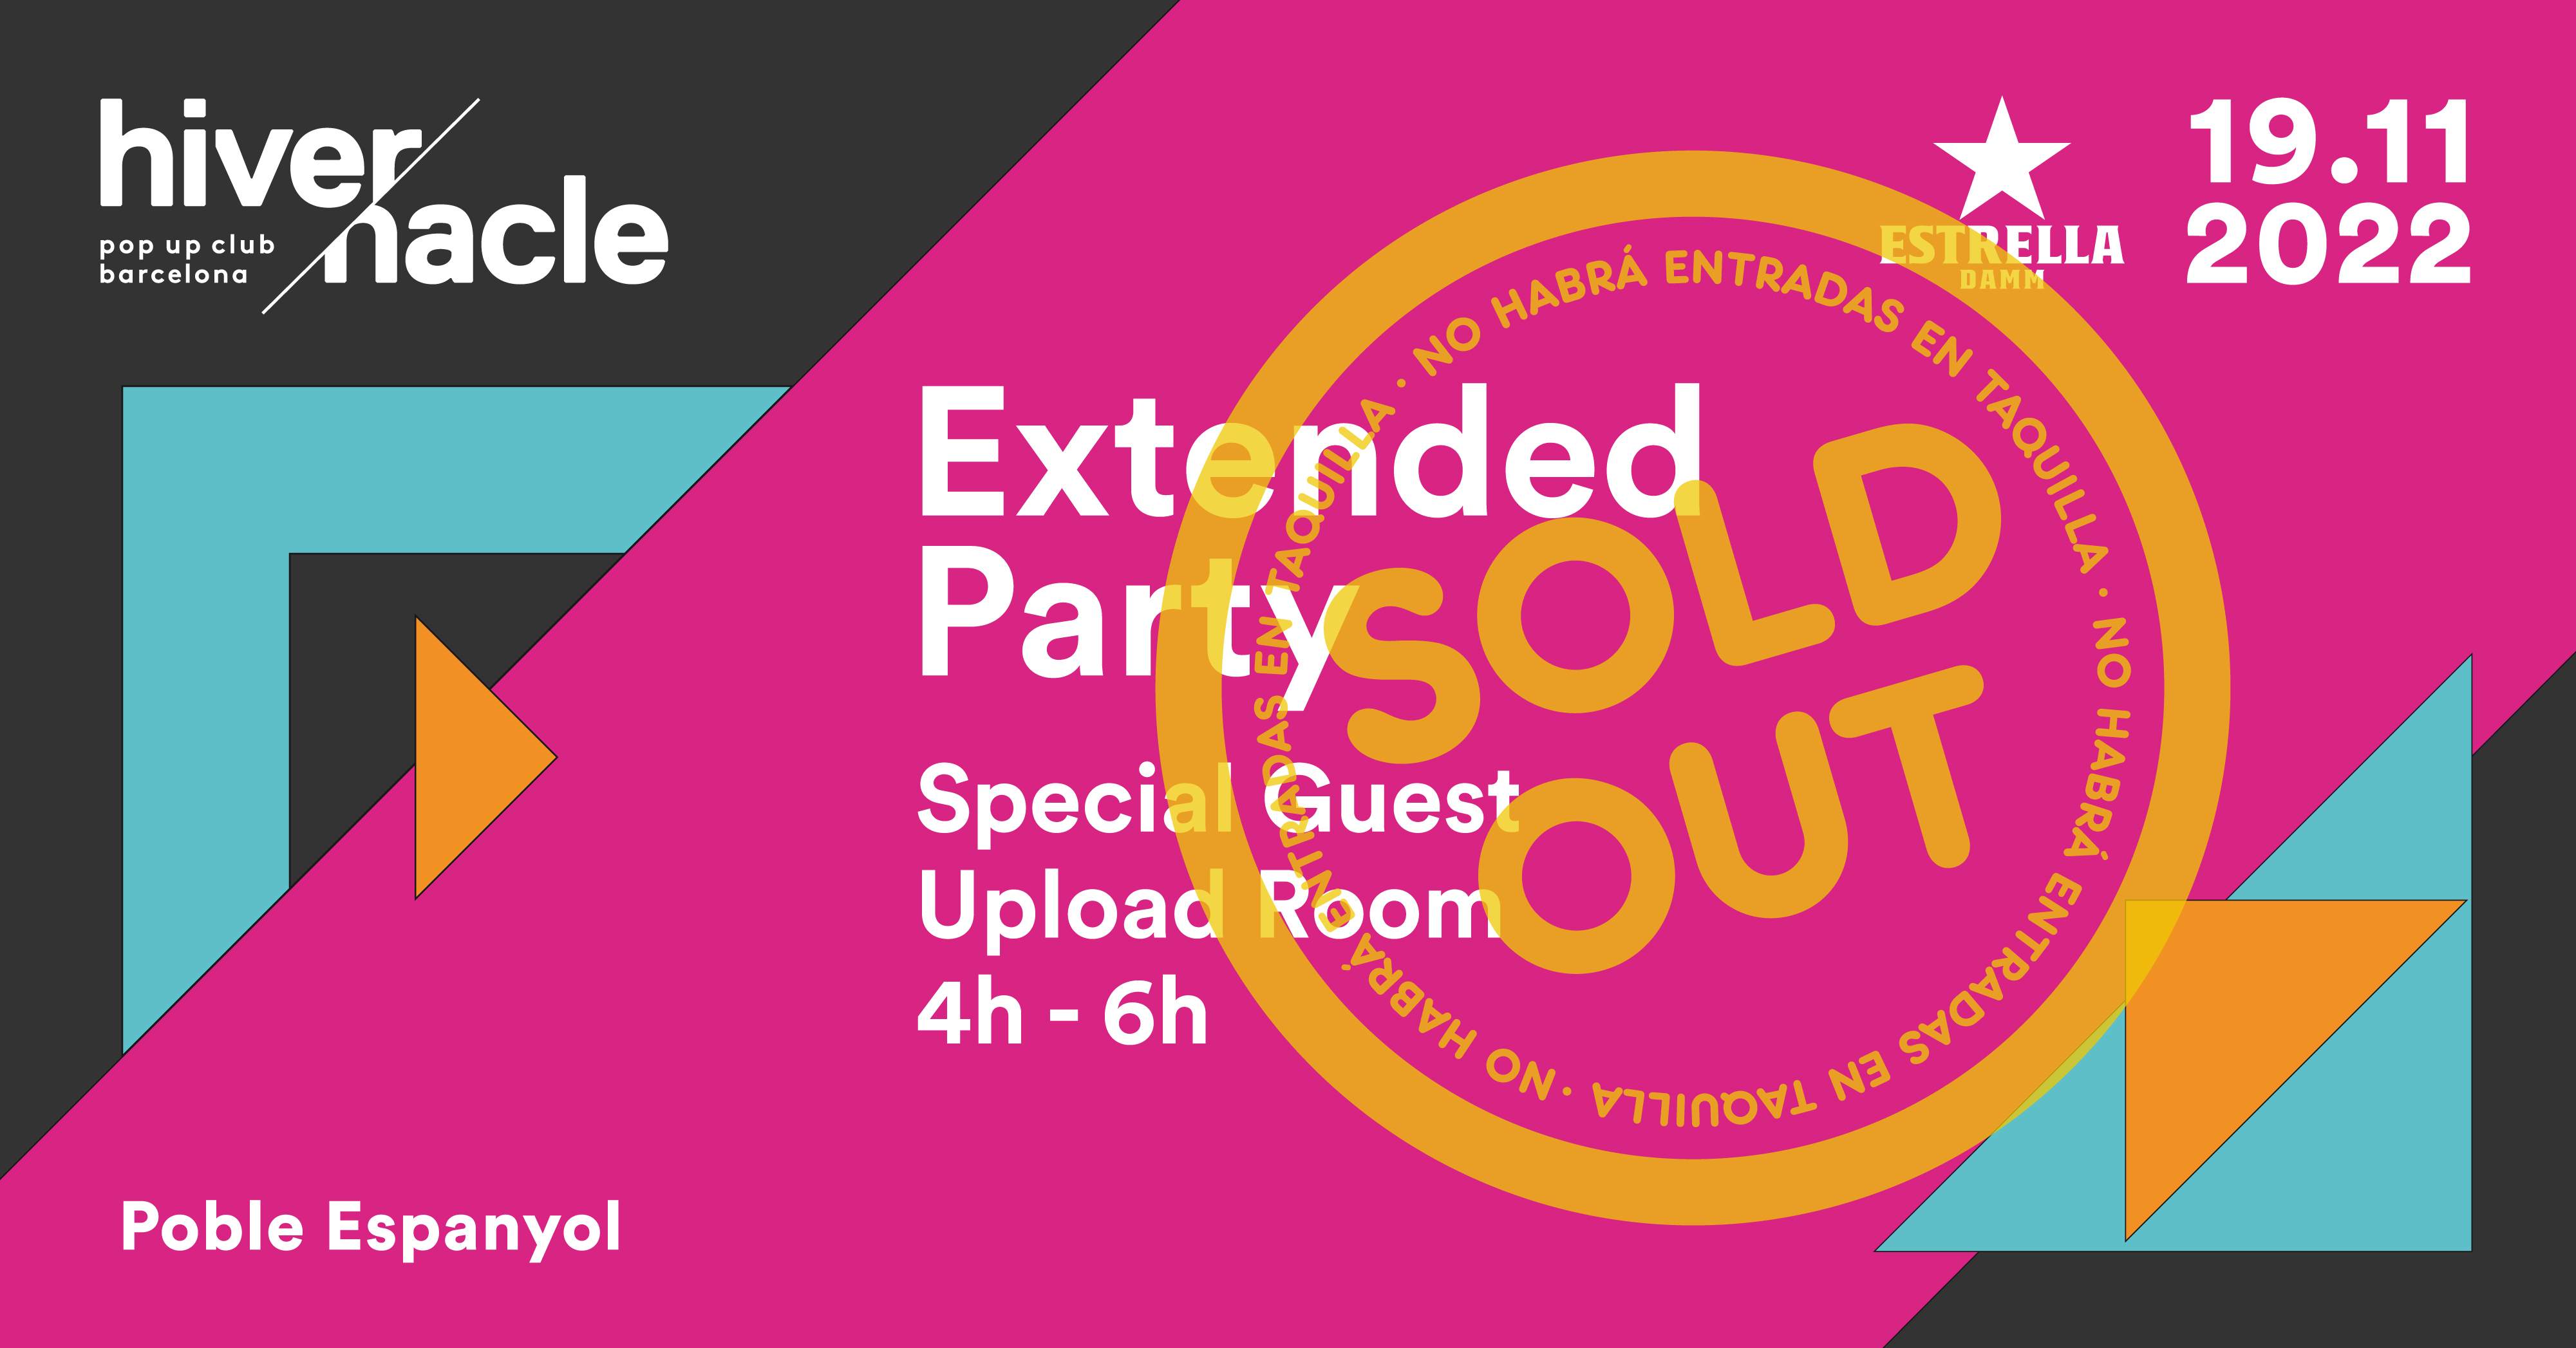 *SOLD OUT* Extended Party Hivernacle #3 (No da Acceso al Hivernacle) - Página trasera